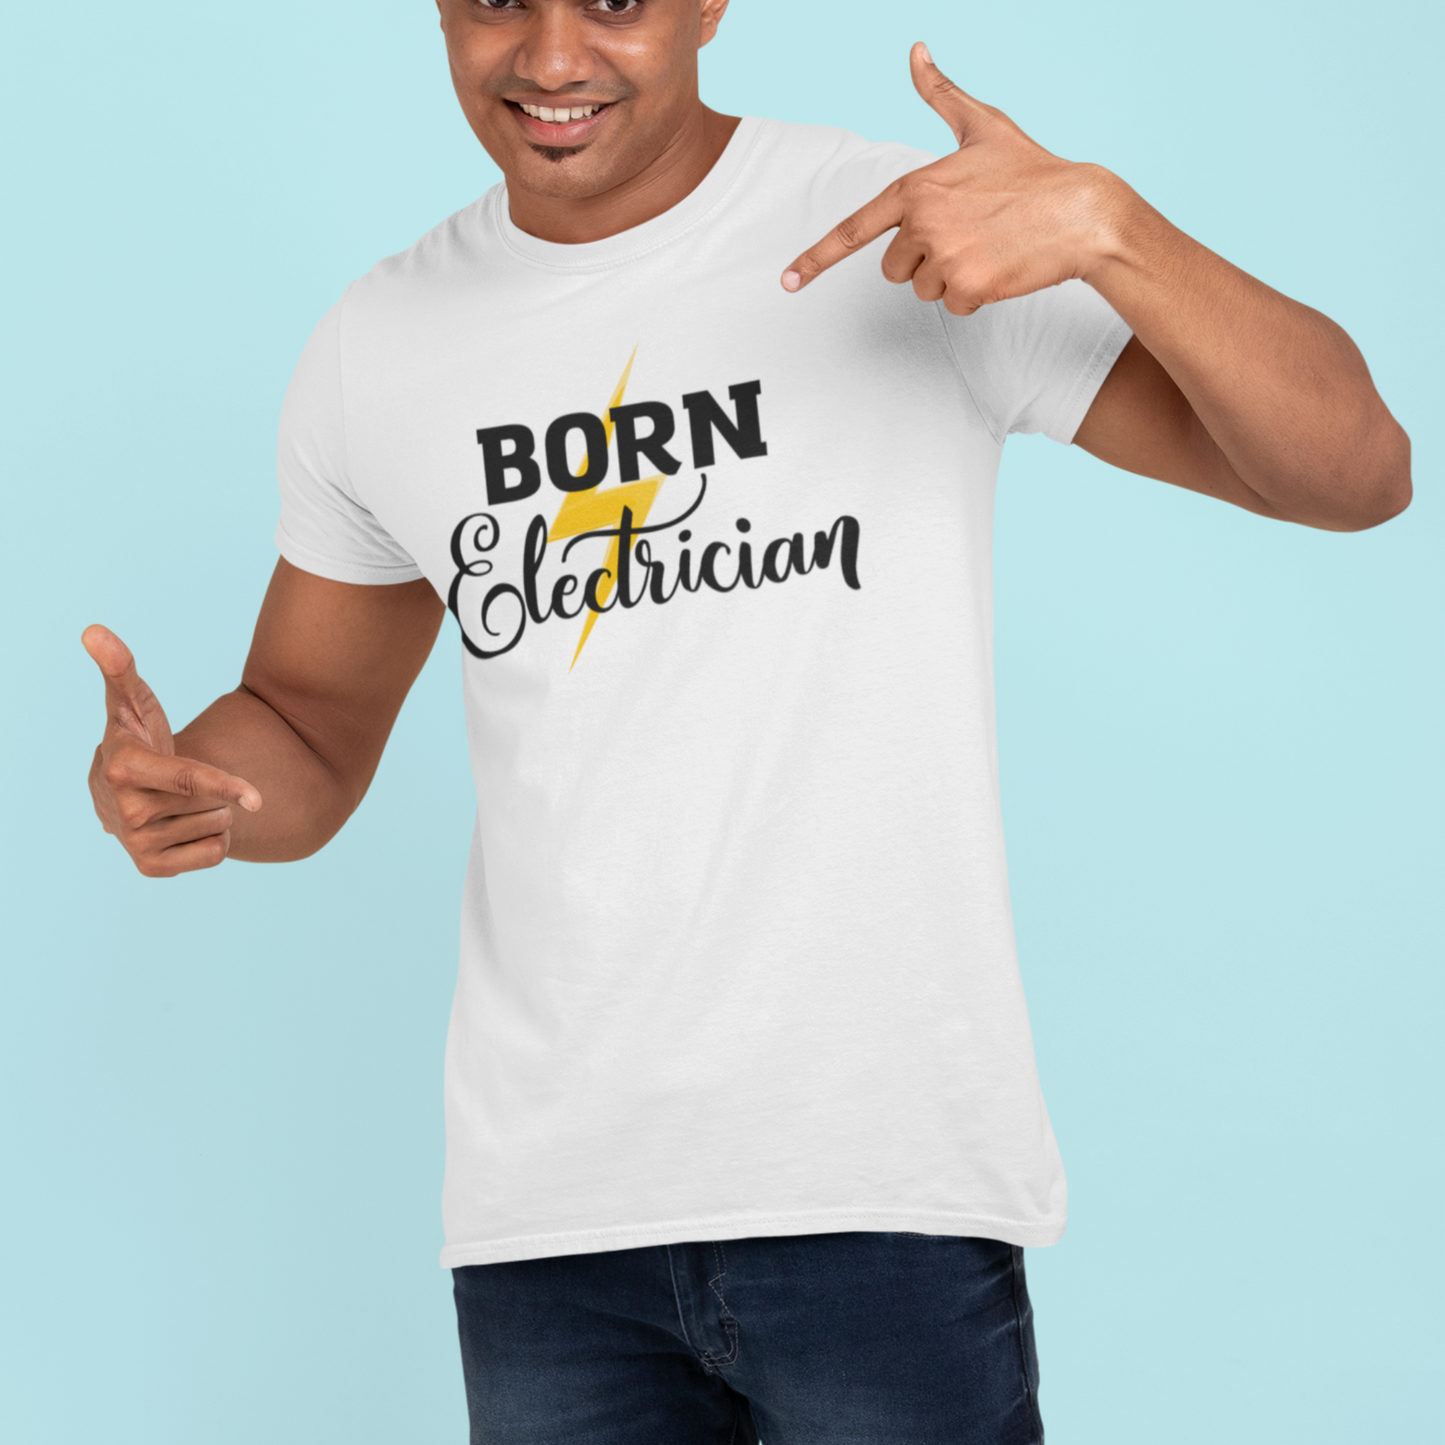 Born Electrician Unisex Tee, Electrician Husband Gift, Electrician Shirt, Electrician Gift, Electrician Shirts, Electrician Dad, Electrician T Shirt, Electrical Engineer Electrical Worker